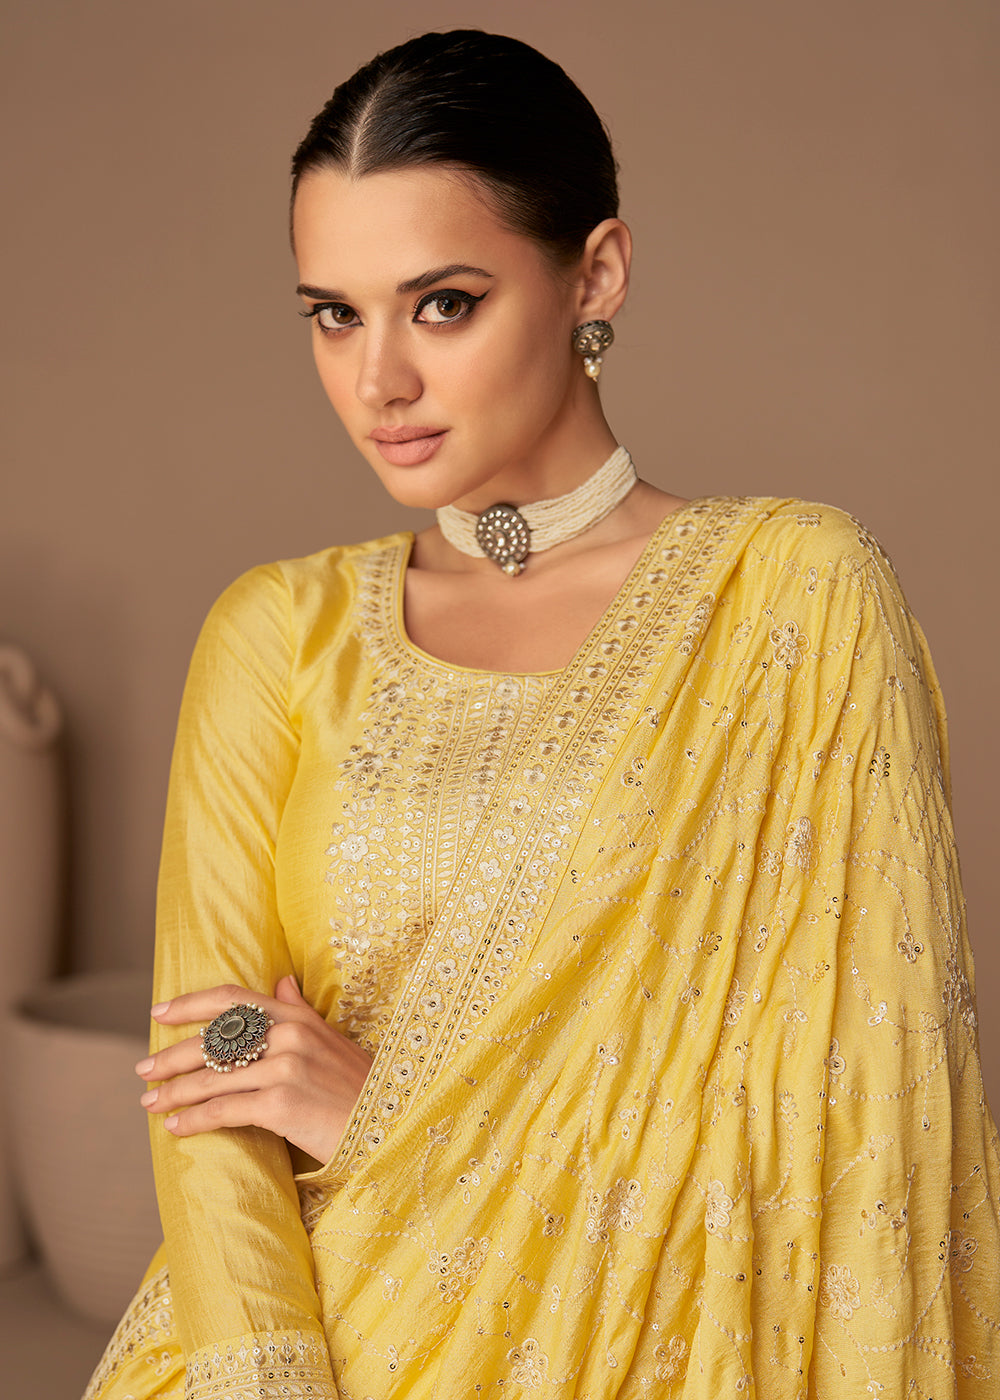 Buy Now Beautiful Bright Yellow & Gold Embroidered Premium Silk Salwar Suit Online in USA, UK, Canada, Germany, Australia & Worldwide at Empress Clothing.